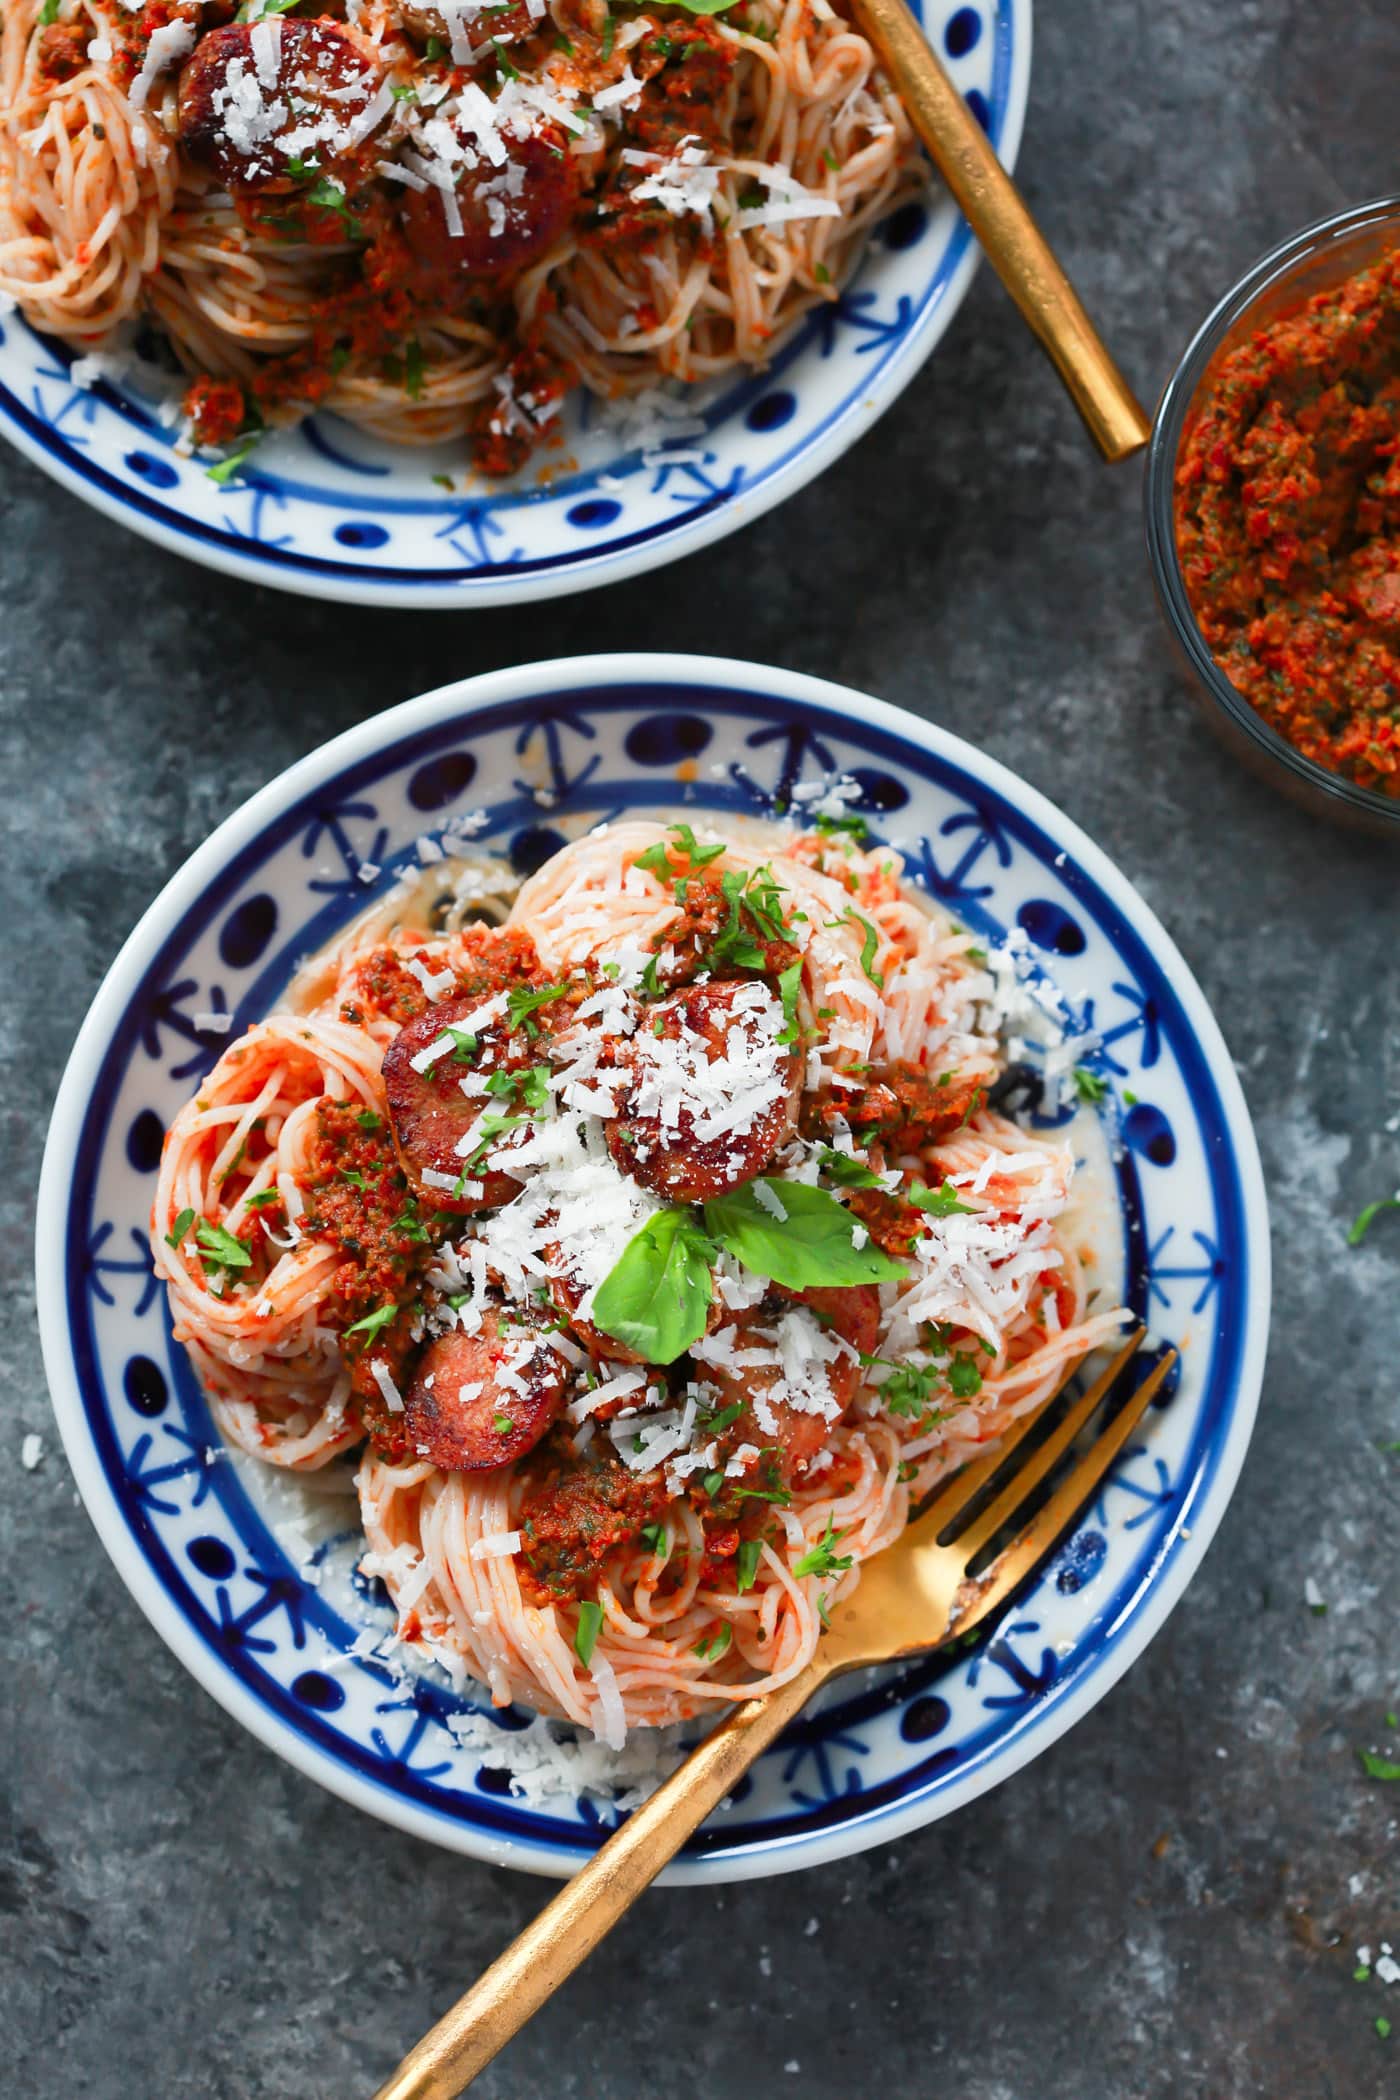 This Italian Sausage Sun-dried Tomato Pesto Pasta is loaded with flavour. And you won't believe this recipe is actually low-carb and gluten-free! 